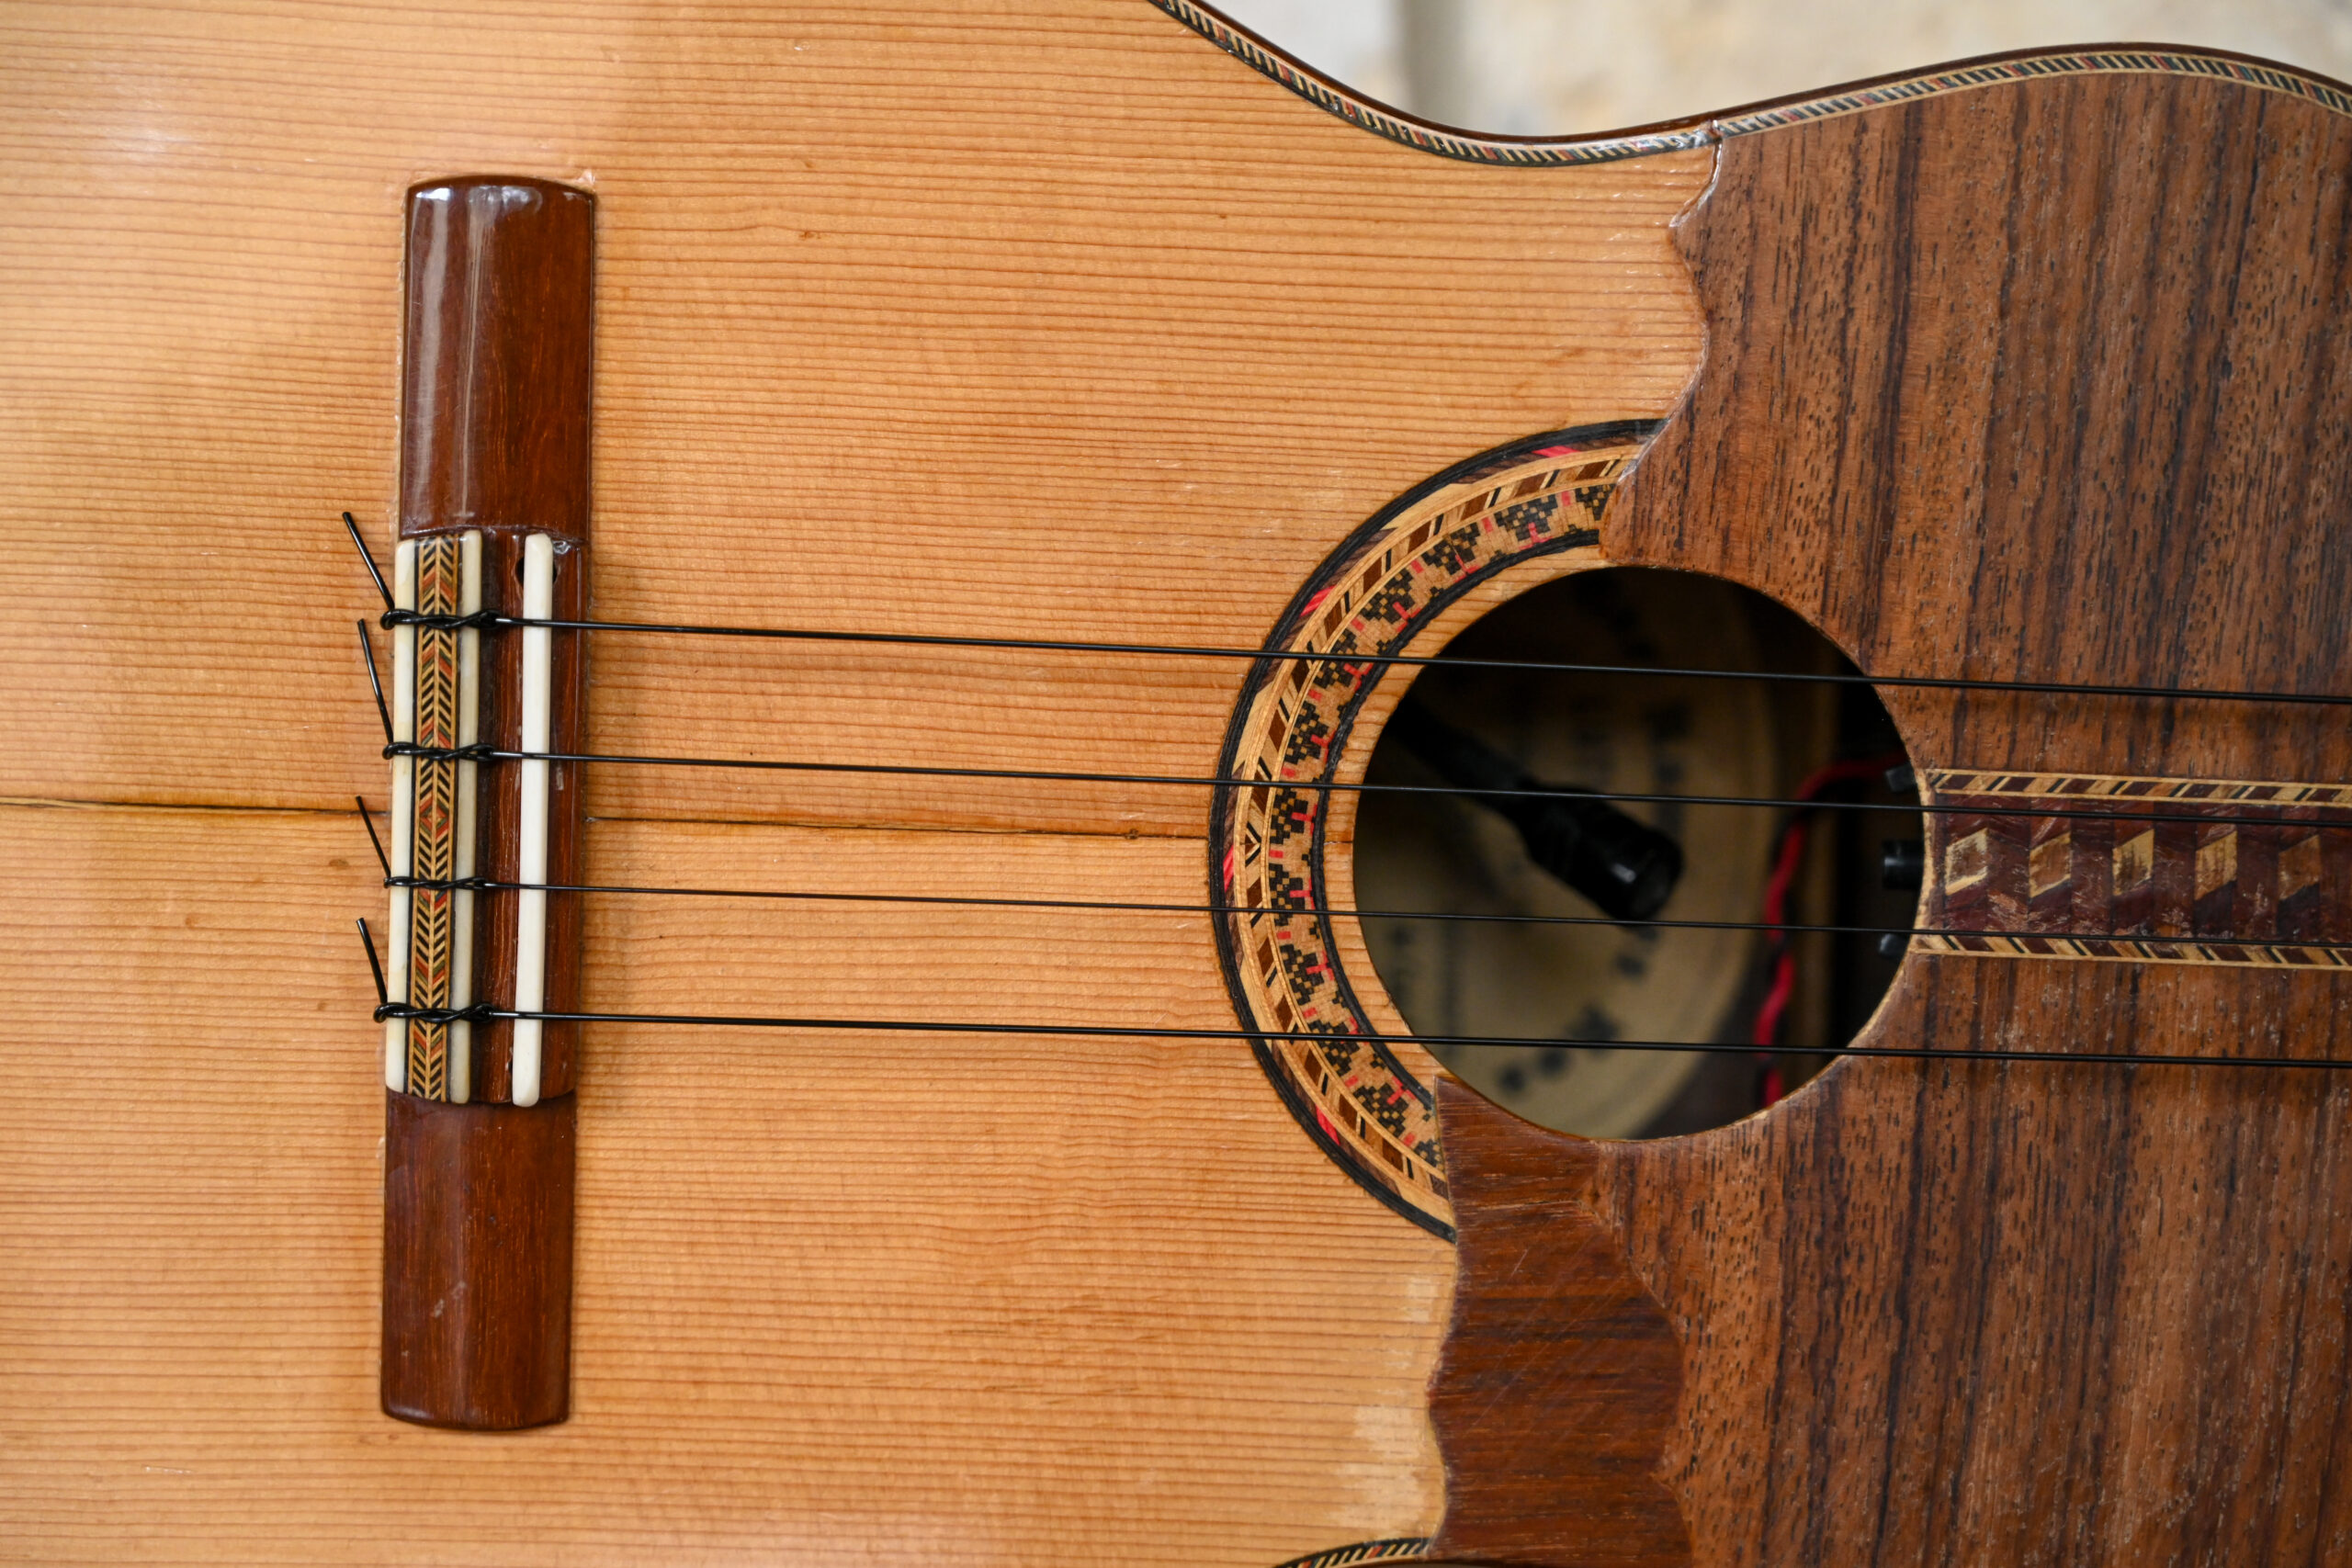 A close up of the strings and sound hole of the cuatro guitar. The guitar has four strings.